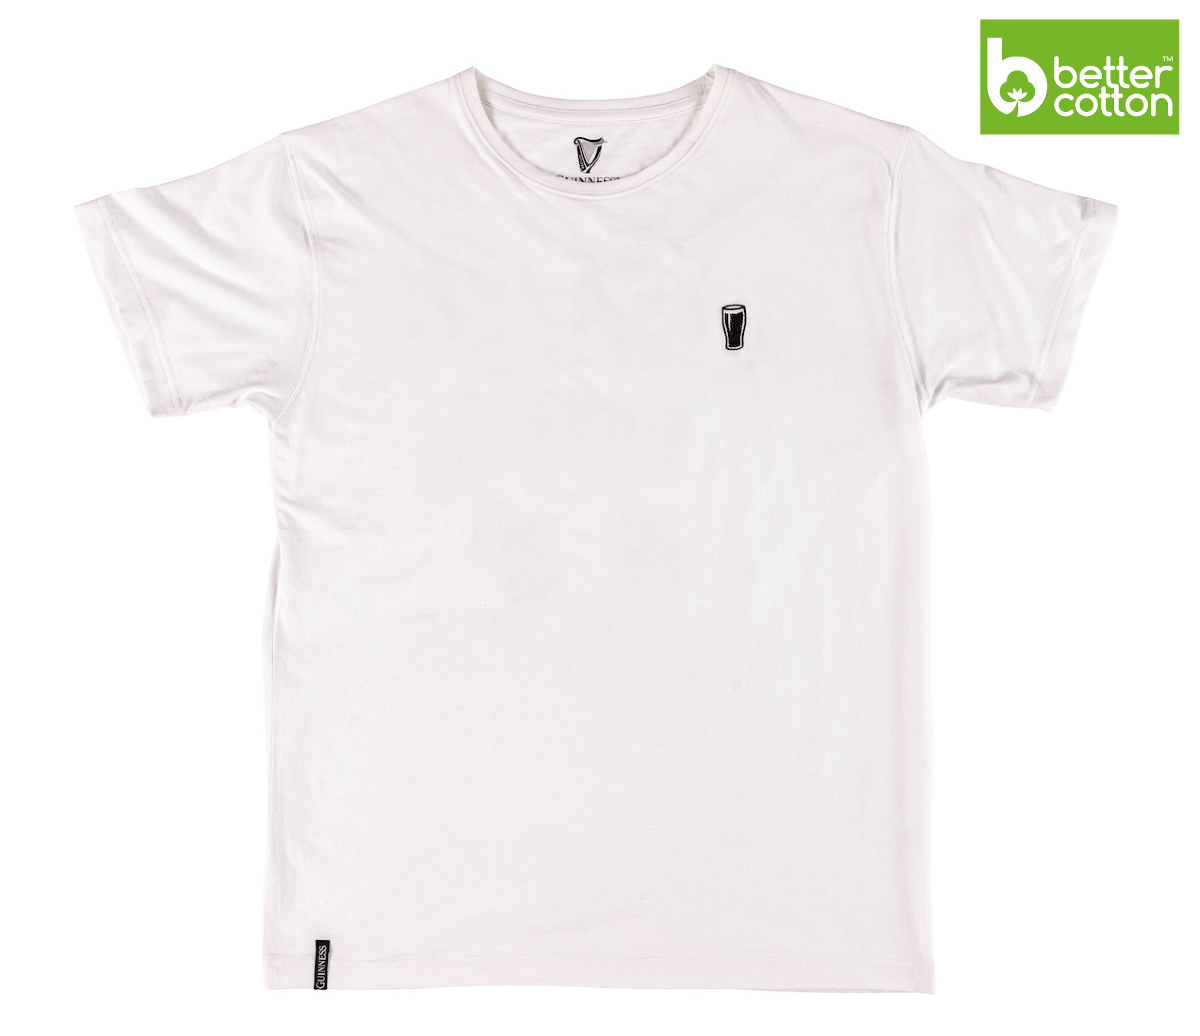 Guinness Storehouse Exclusive BCI Cotton White T-Shirt